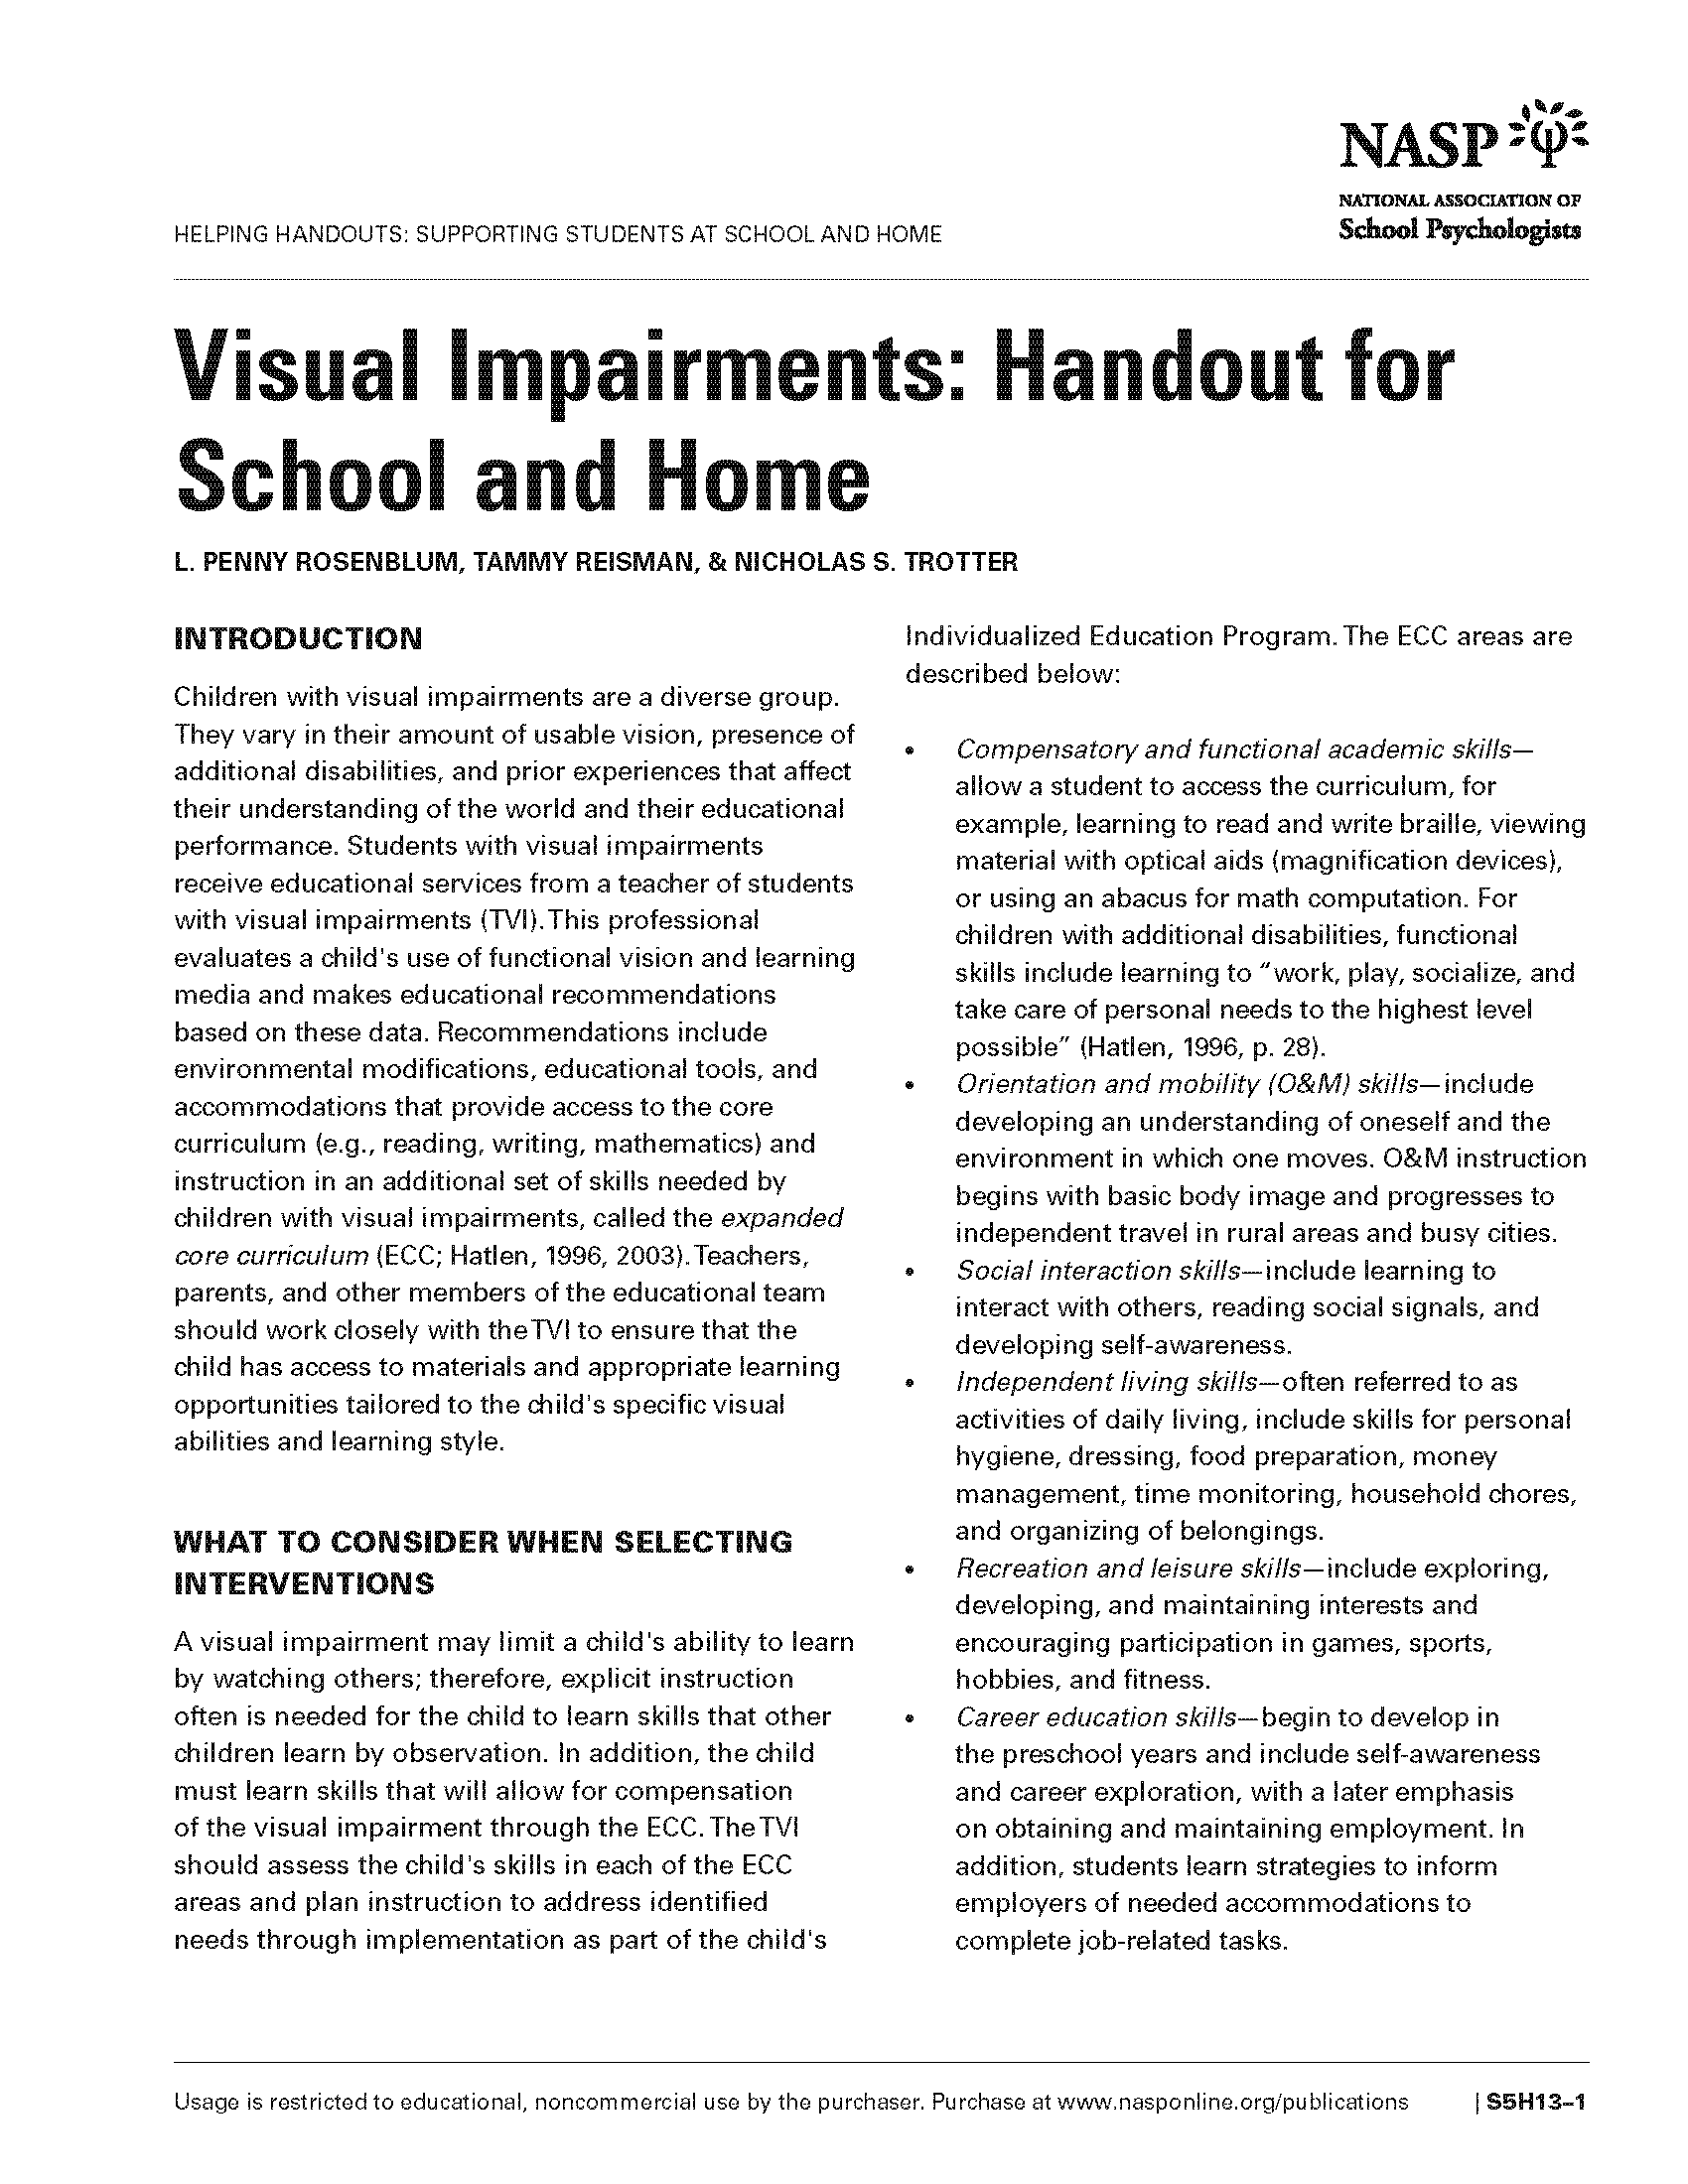 Visual Impairments: Helping Handout for School and Home